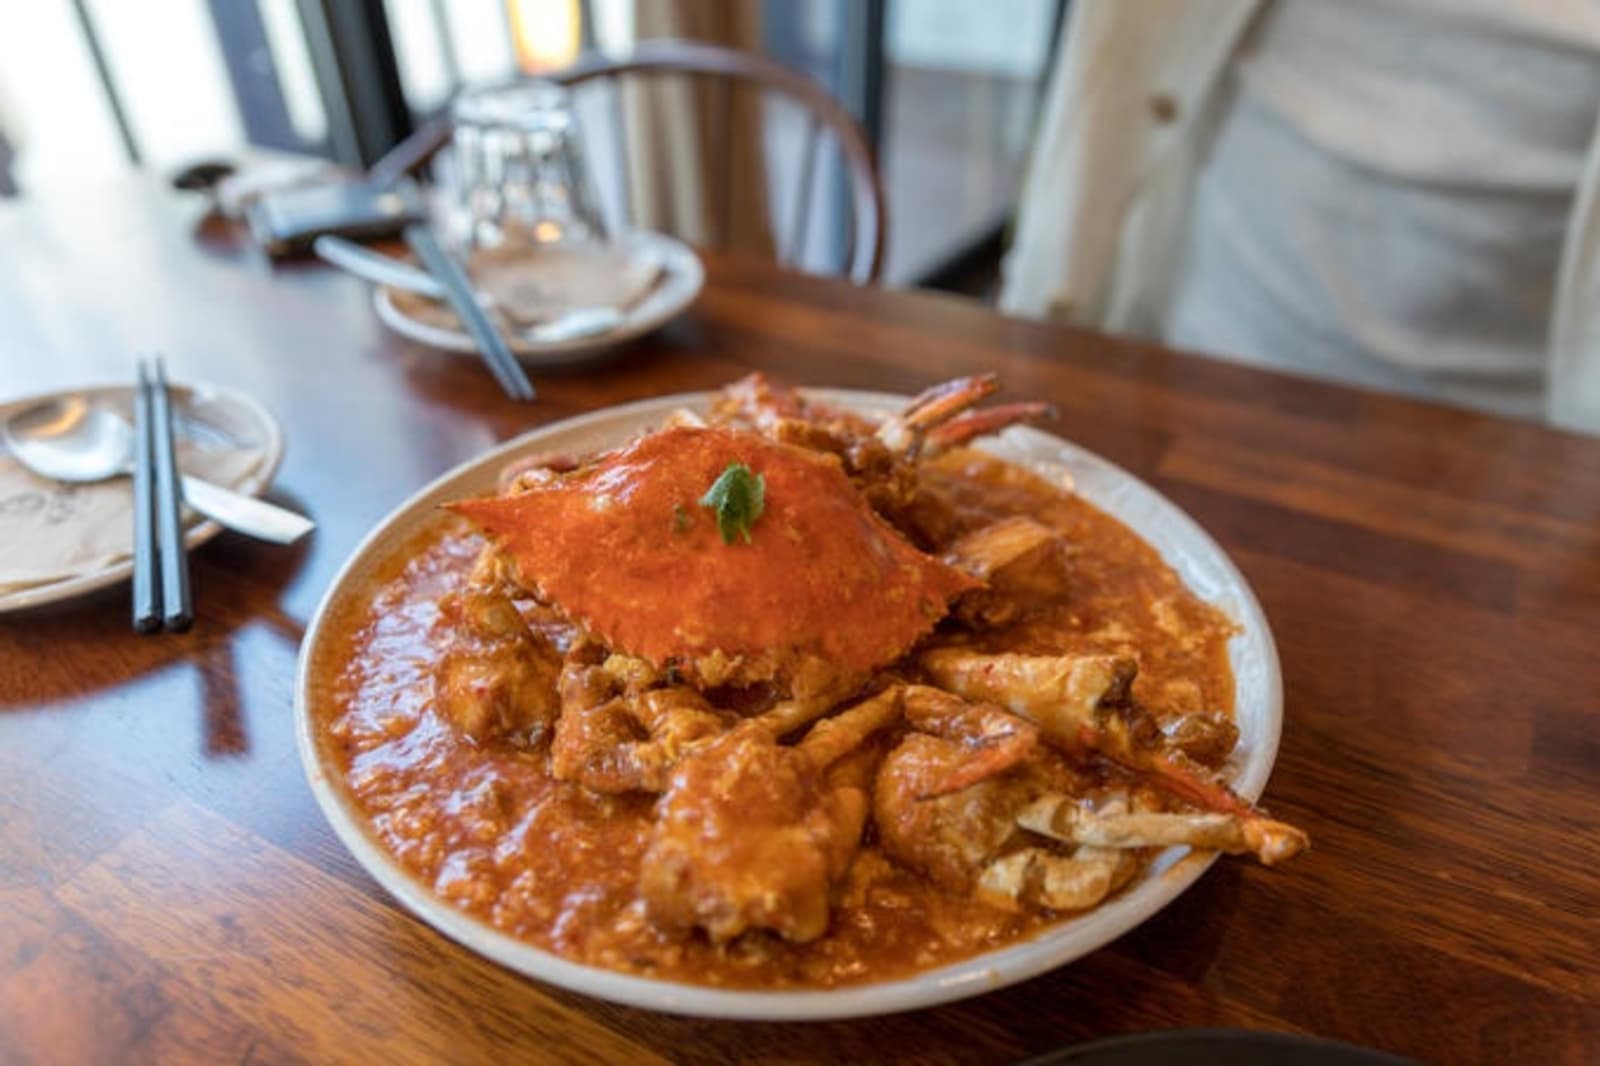 1-chili-crab-gettyimages-1026241106.jpeg